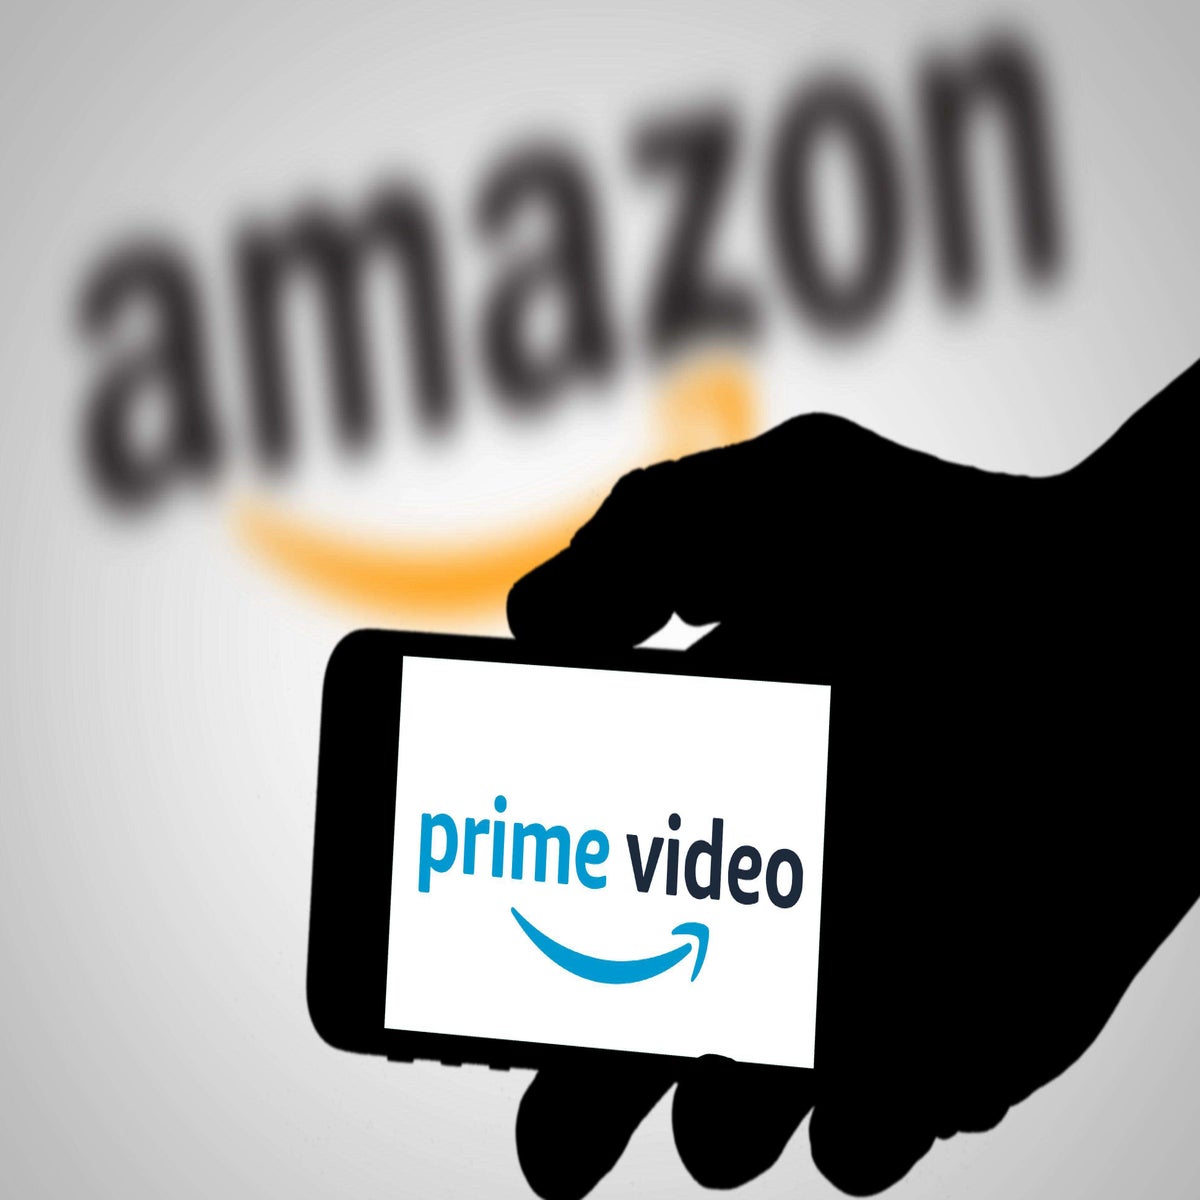 Prime Video will soon start running ads – unless you pay even more